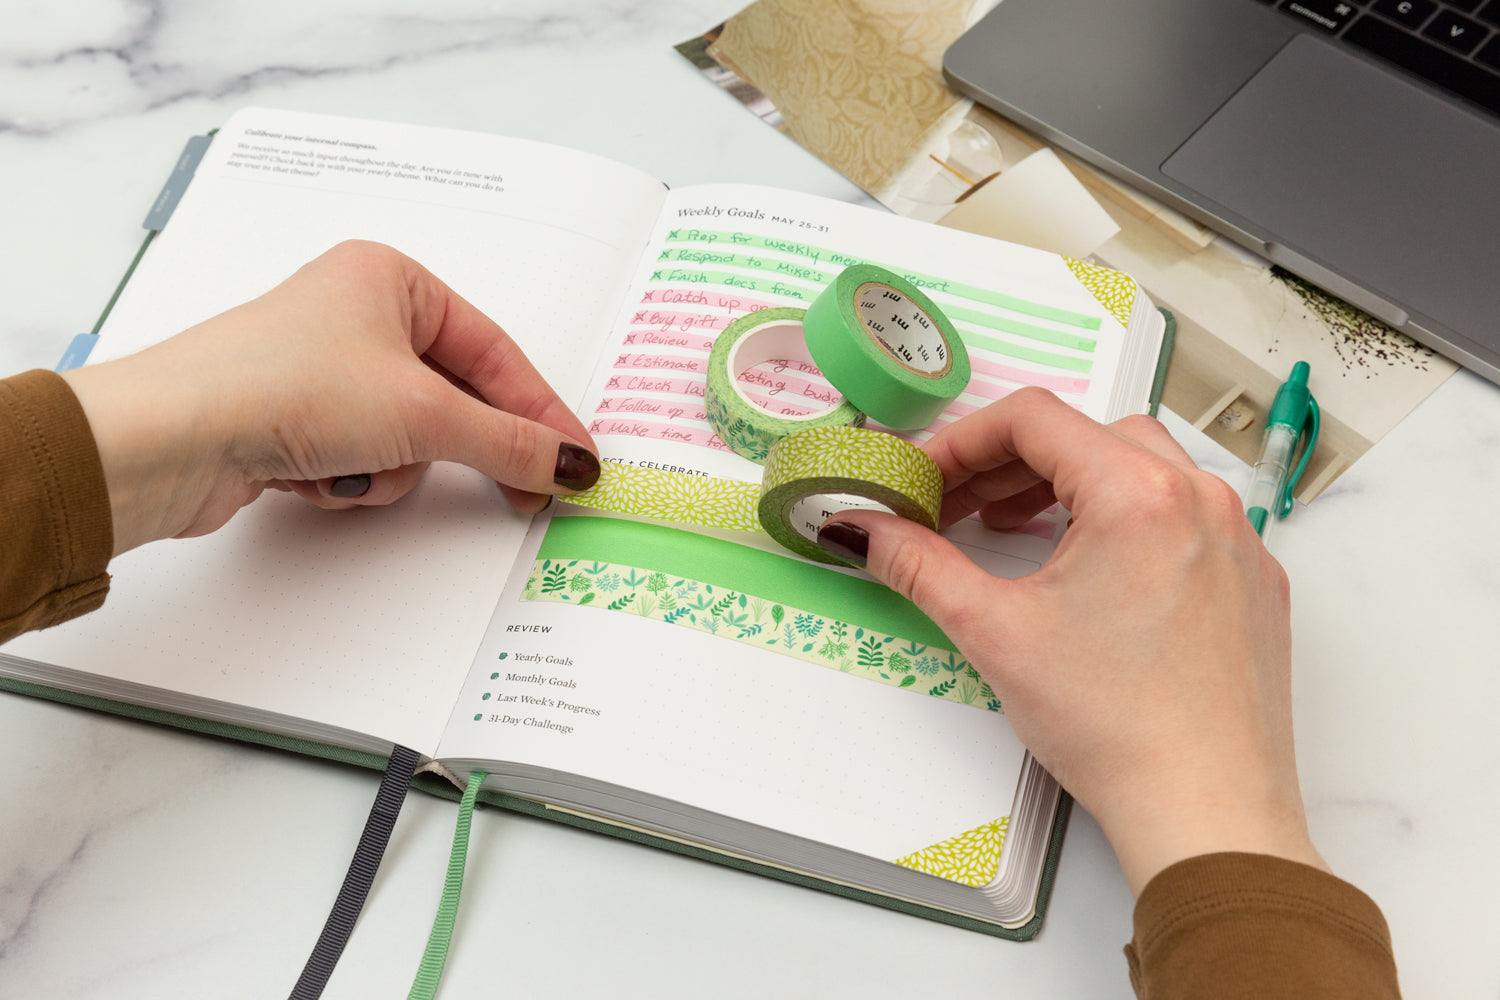 Two hands apply colorful green washi tape to a filled in planner page